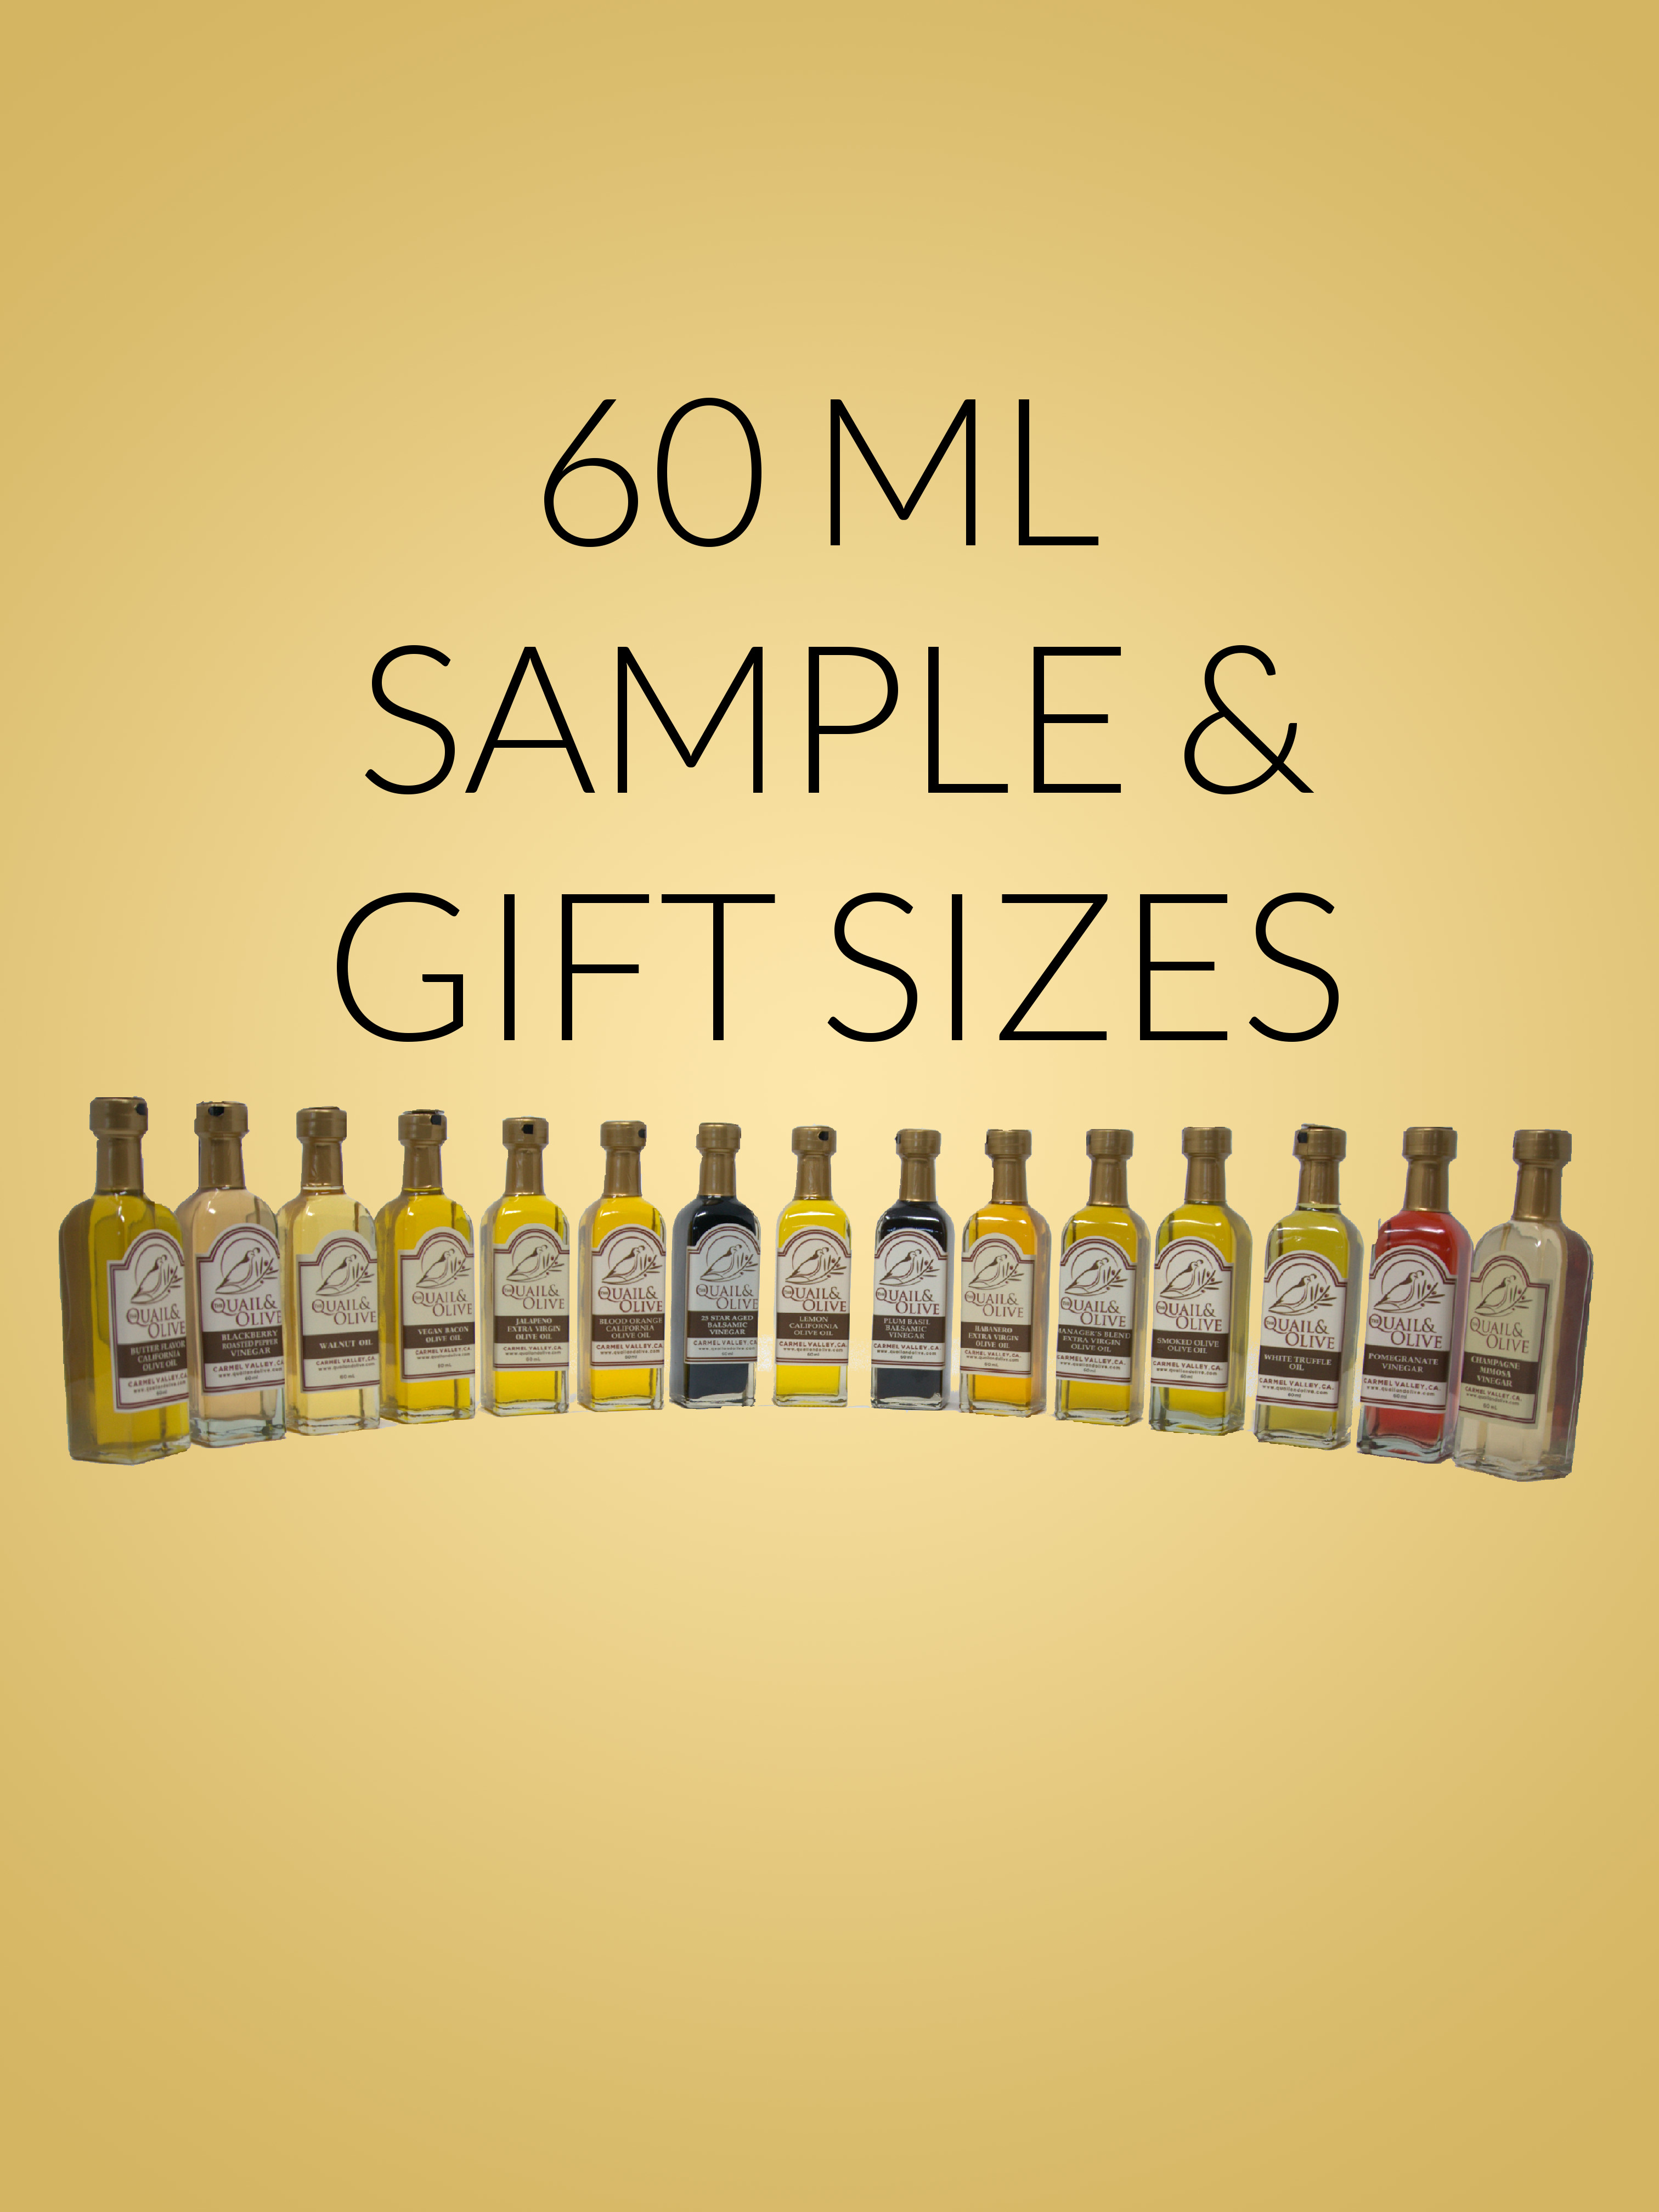 Product Image for The Doctor's Blend EVOO 60